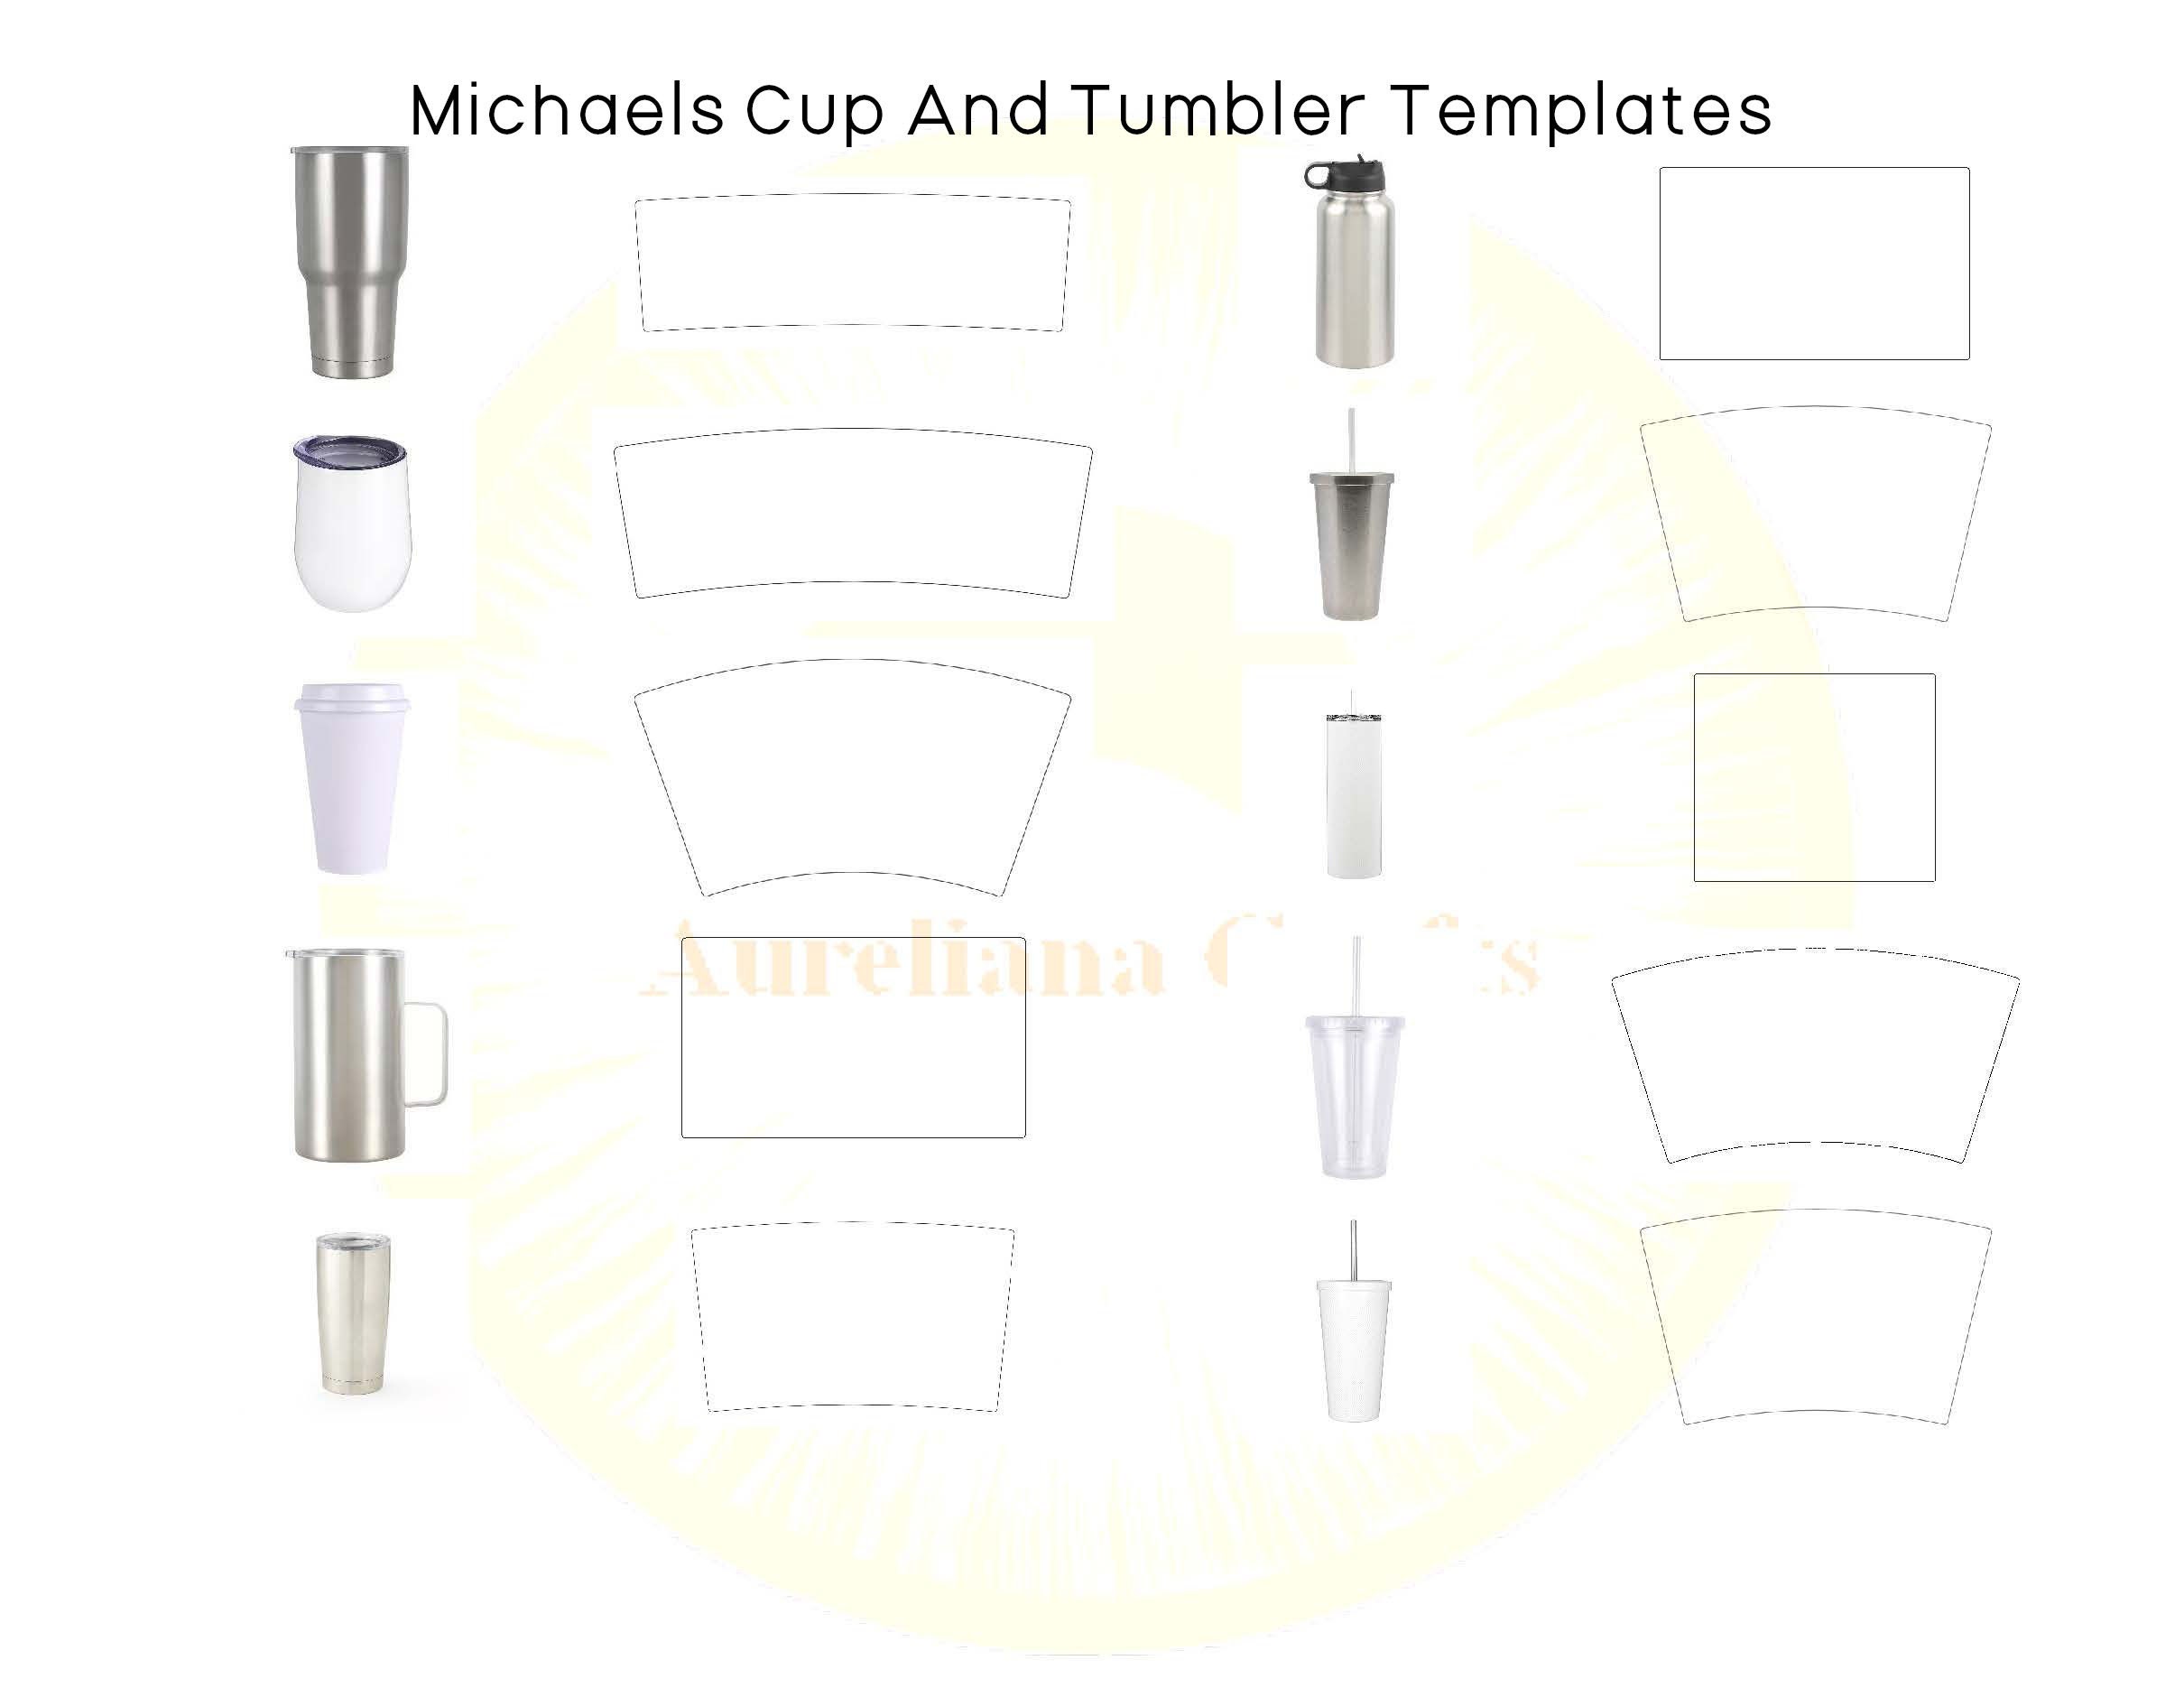 Michaels Cup Tumbler Template Collection Bundle svg,png,jpg,dxf,pdfcricut,  Silhouette, Siser 